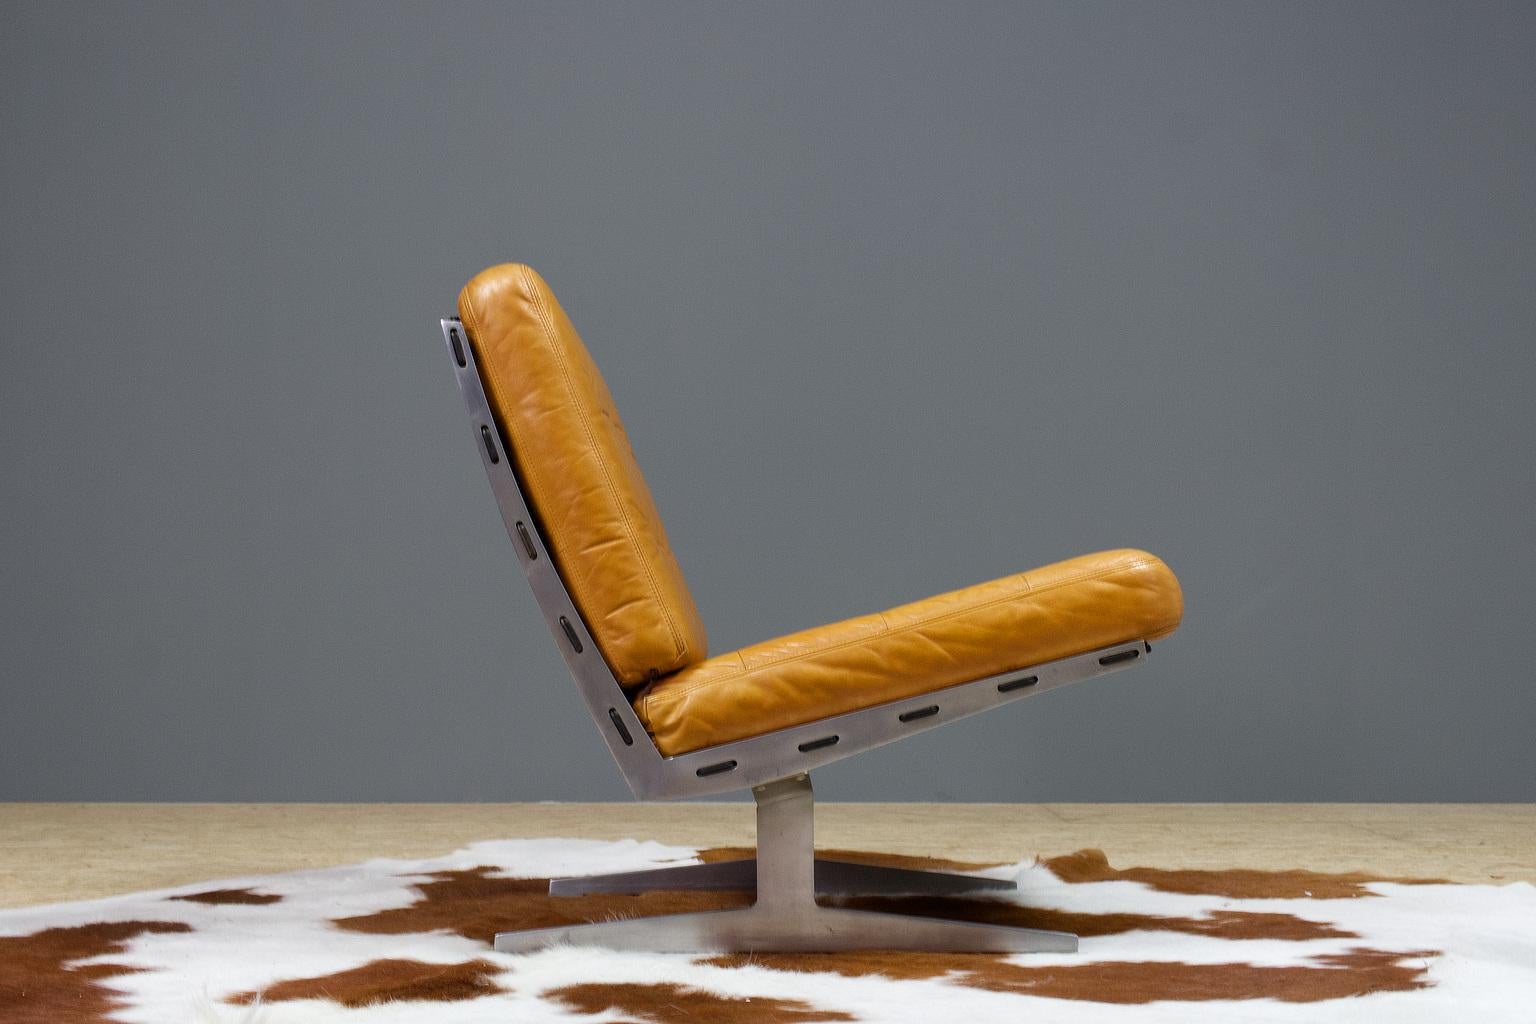 Danish vintage lounge chair by Paul Leidersdorff in solid aluminium frame with a (cognac) brown, padded leather upholstery, Denmark 1965. This lounge chair, model Caravelle, is in great vintage condition. The solid aluminium frame is heavy and